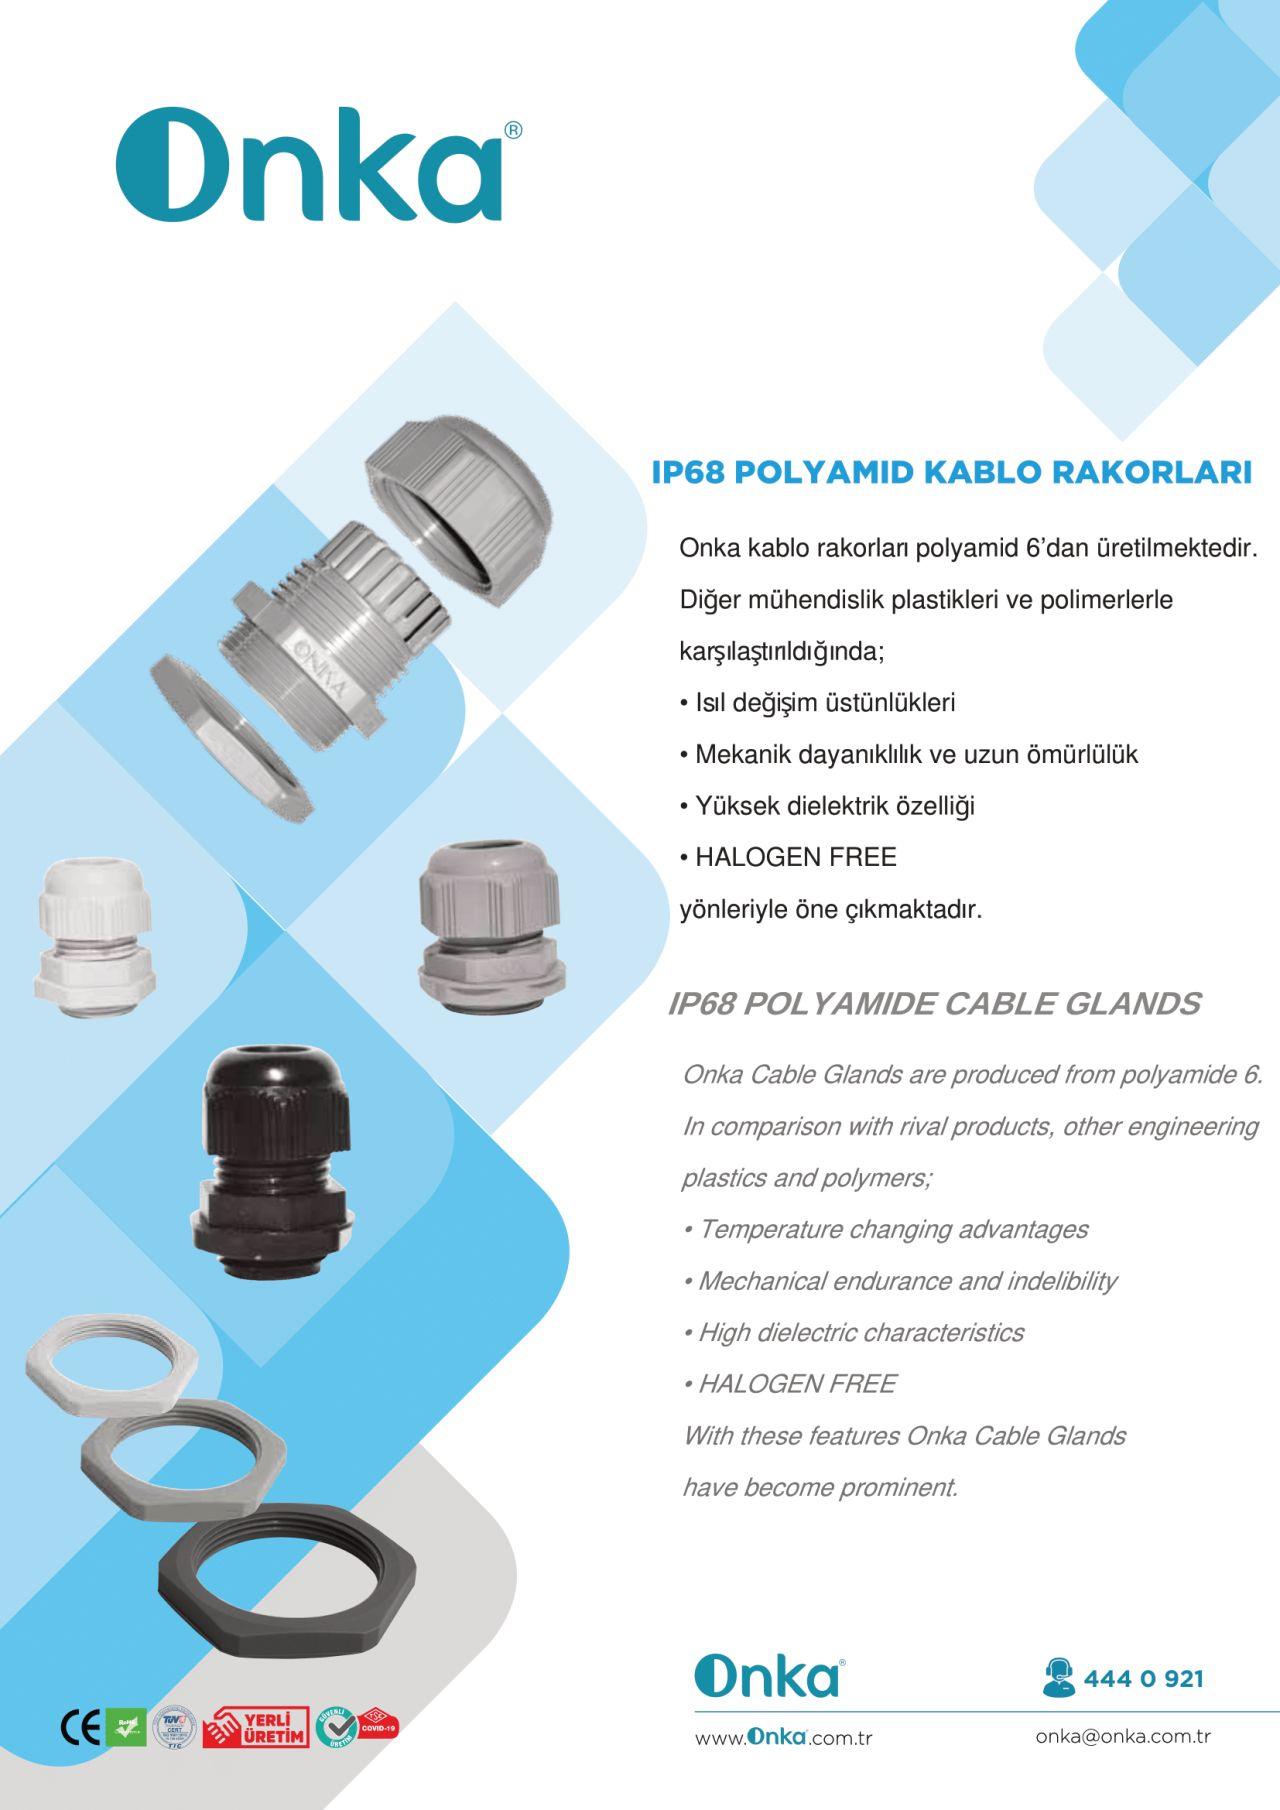 All in all trying not to be just another cable gland supplier in the market..